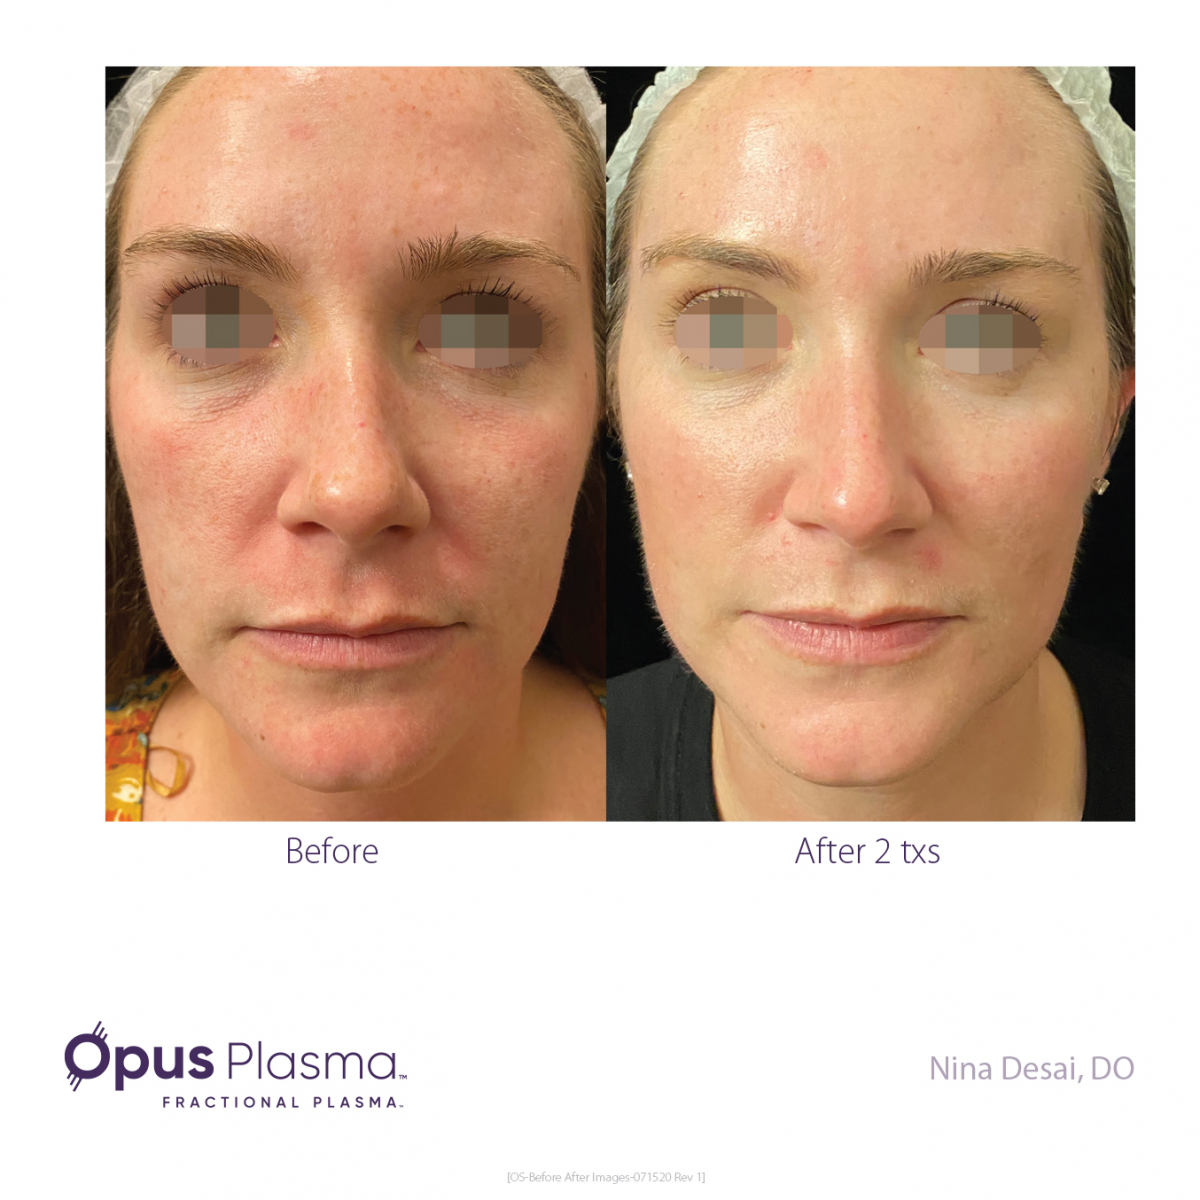 Opus-Before-and-After-B2C-1